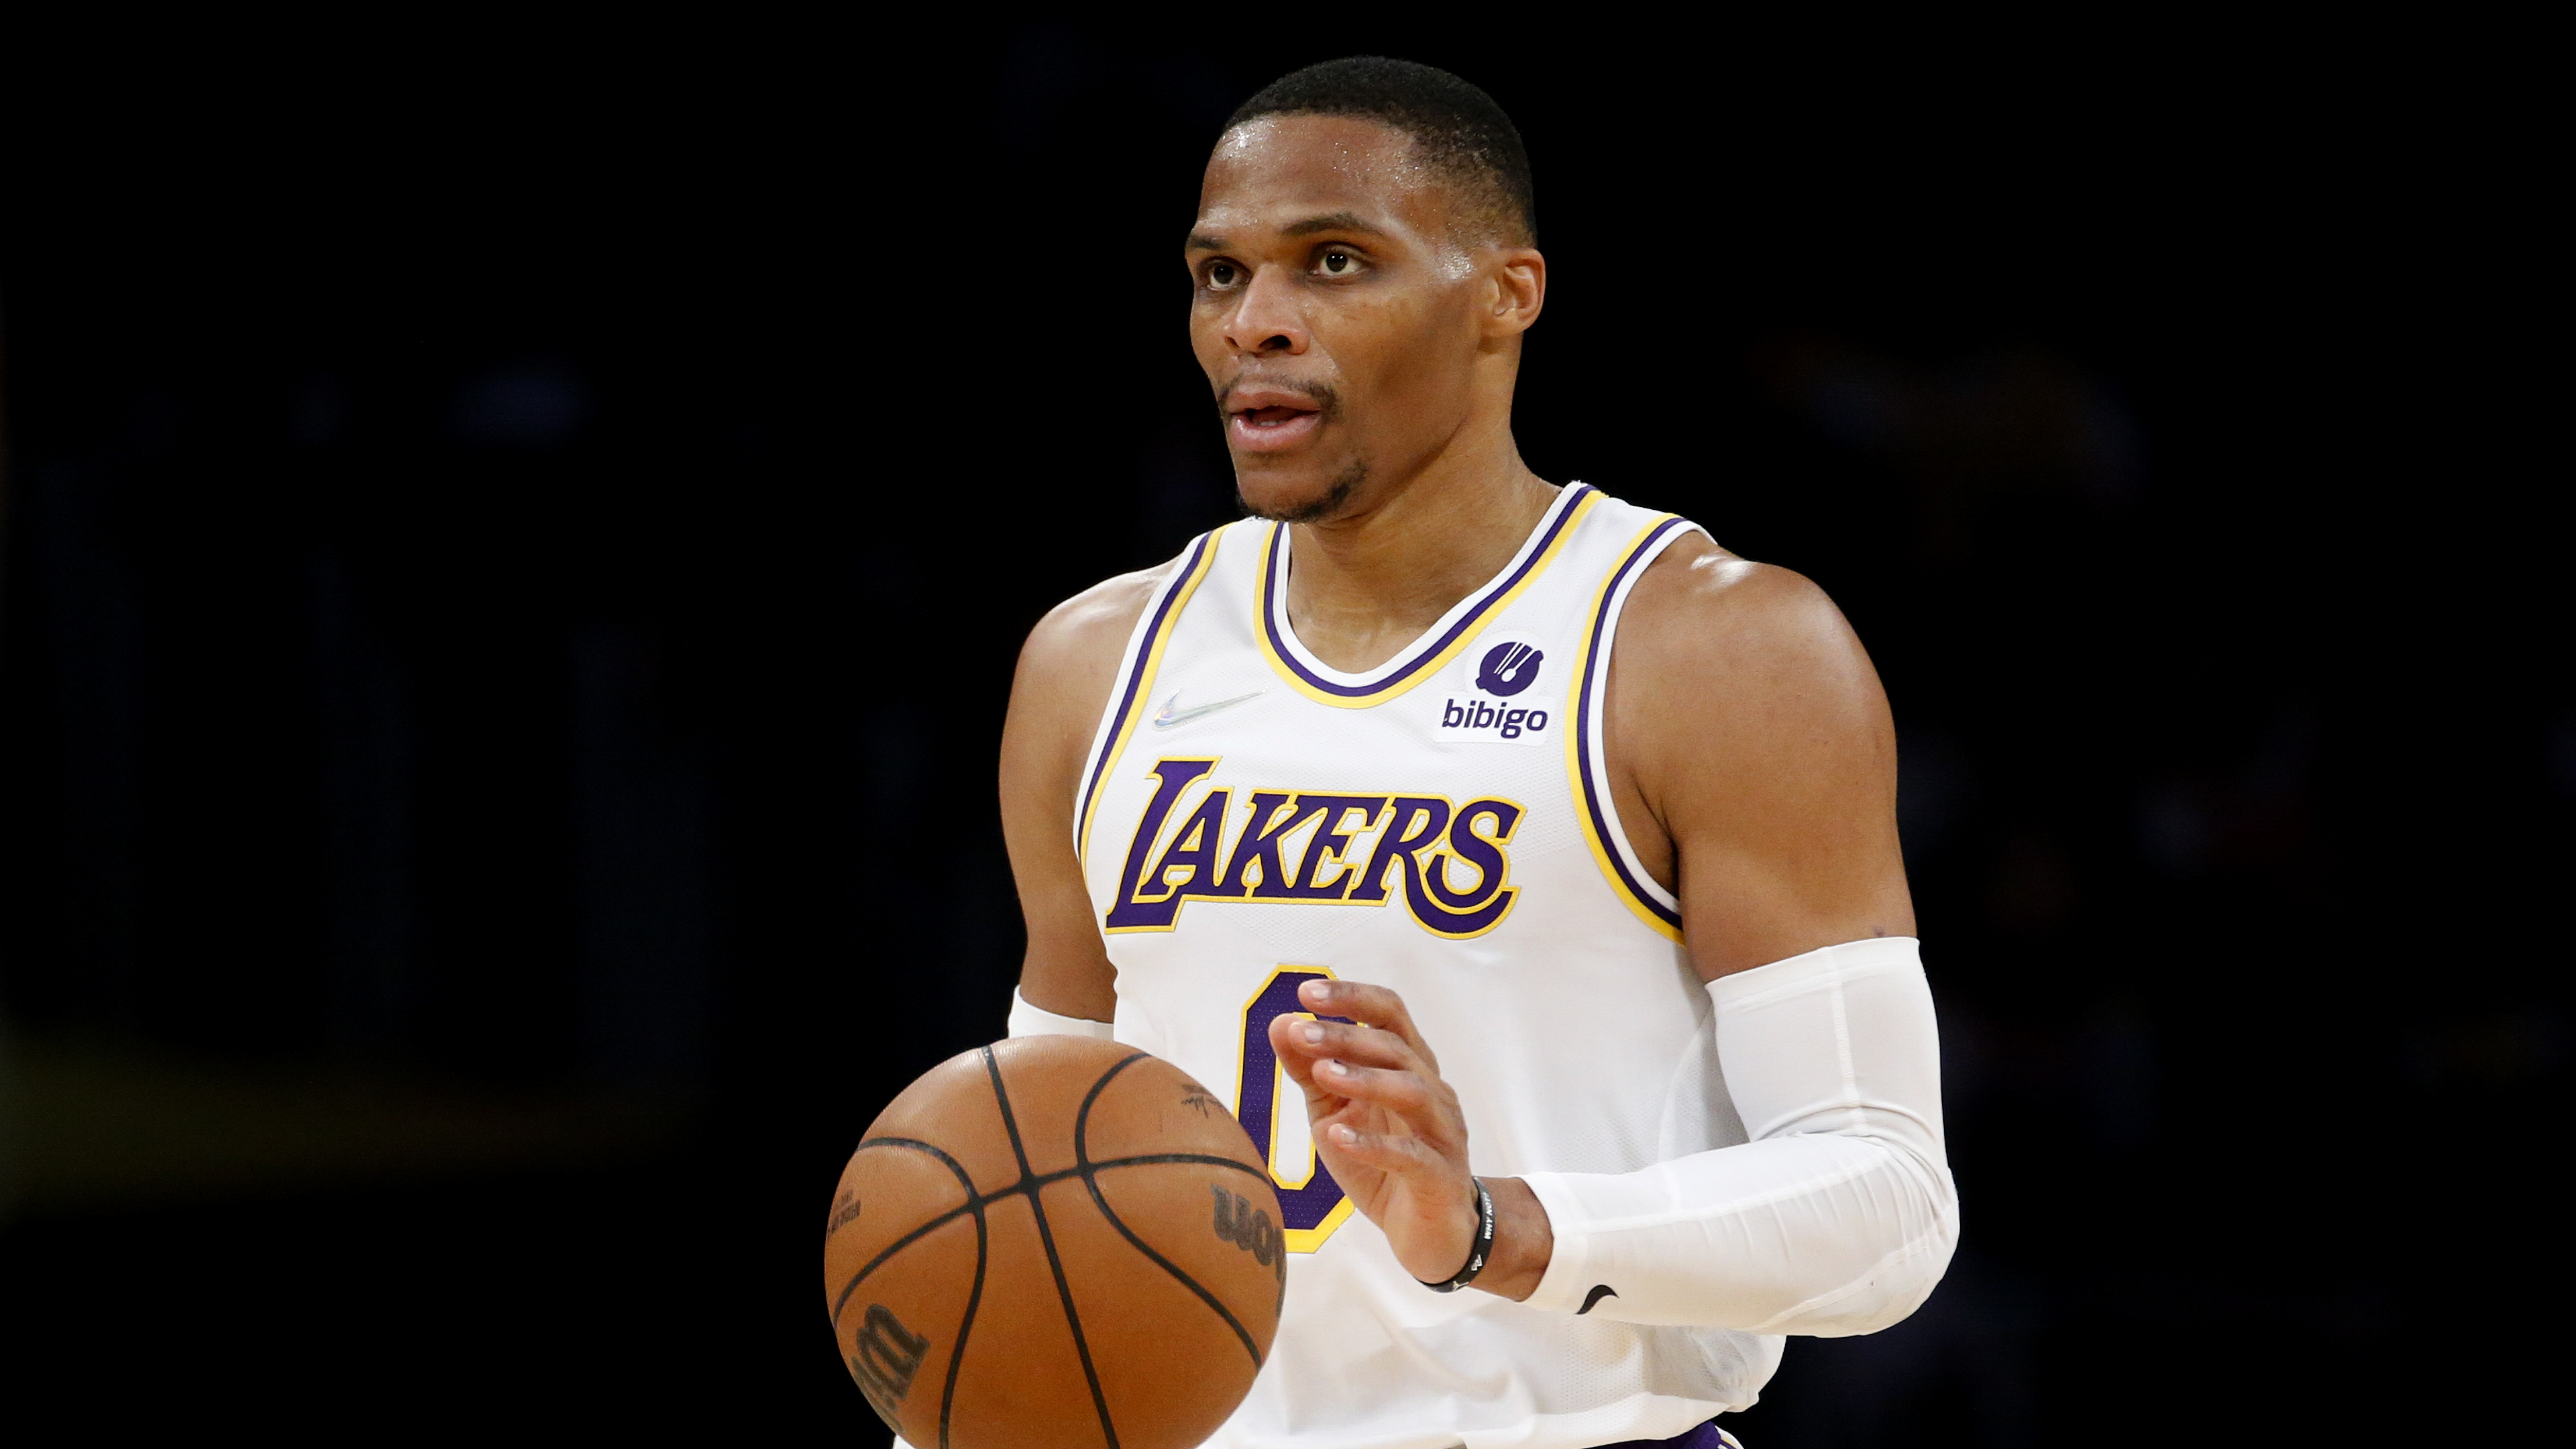 Lakers' Westbrook out with sore back against Blazers